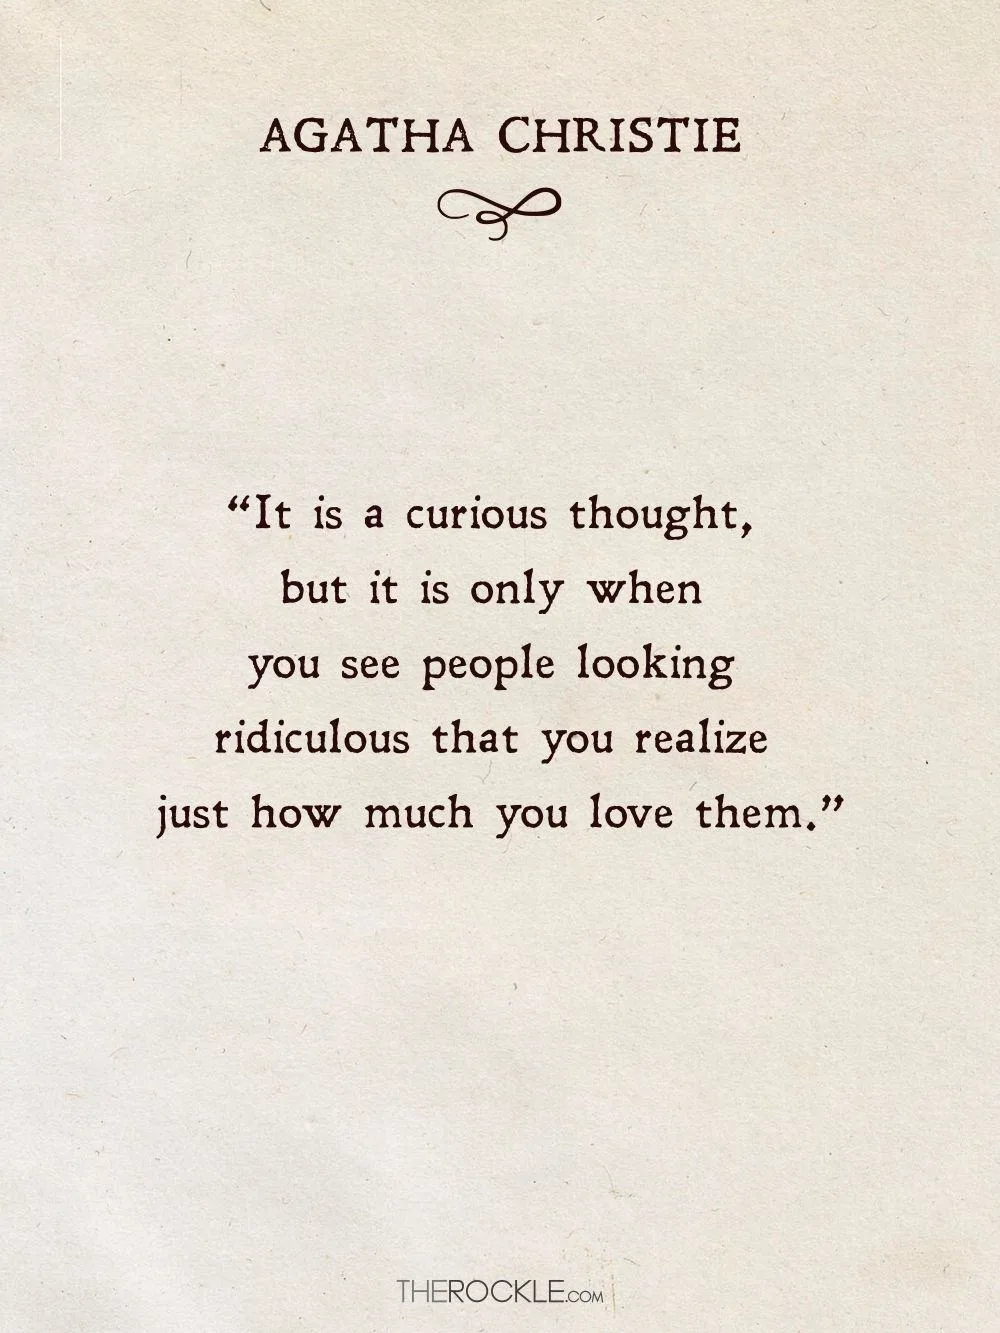 “It is a curious thought, but it is only when you see people looking ridiculous that you realize just how much you love them.” ― Agatha Christie: An Autobiography